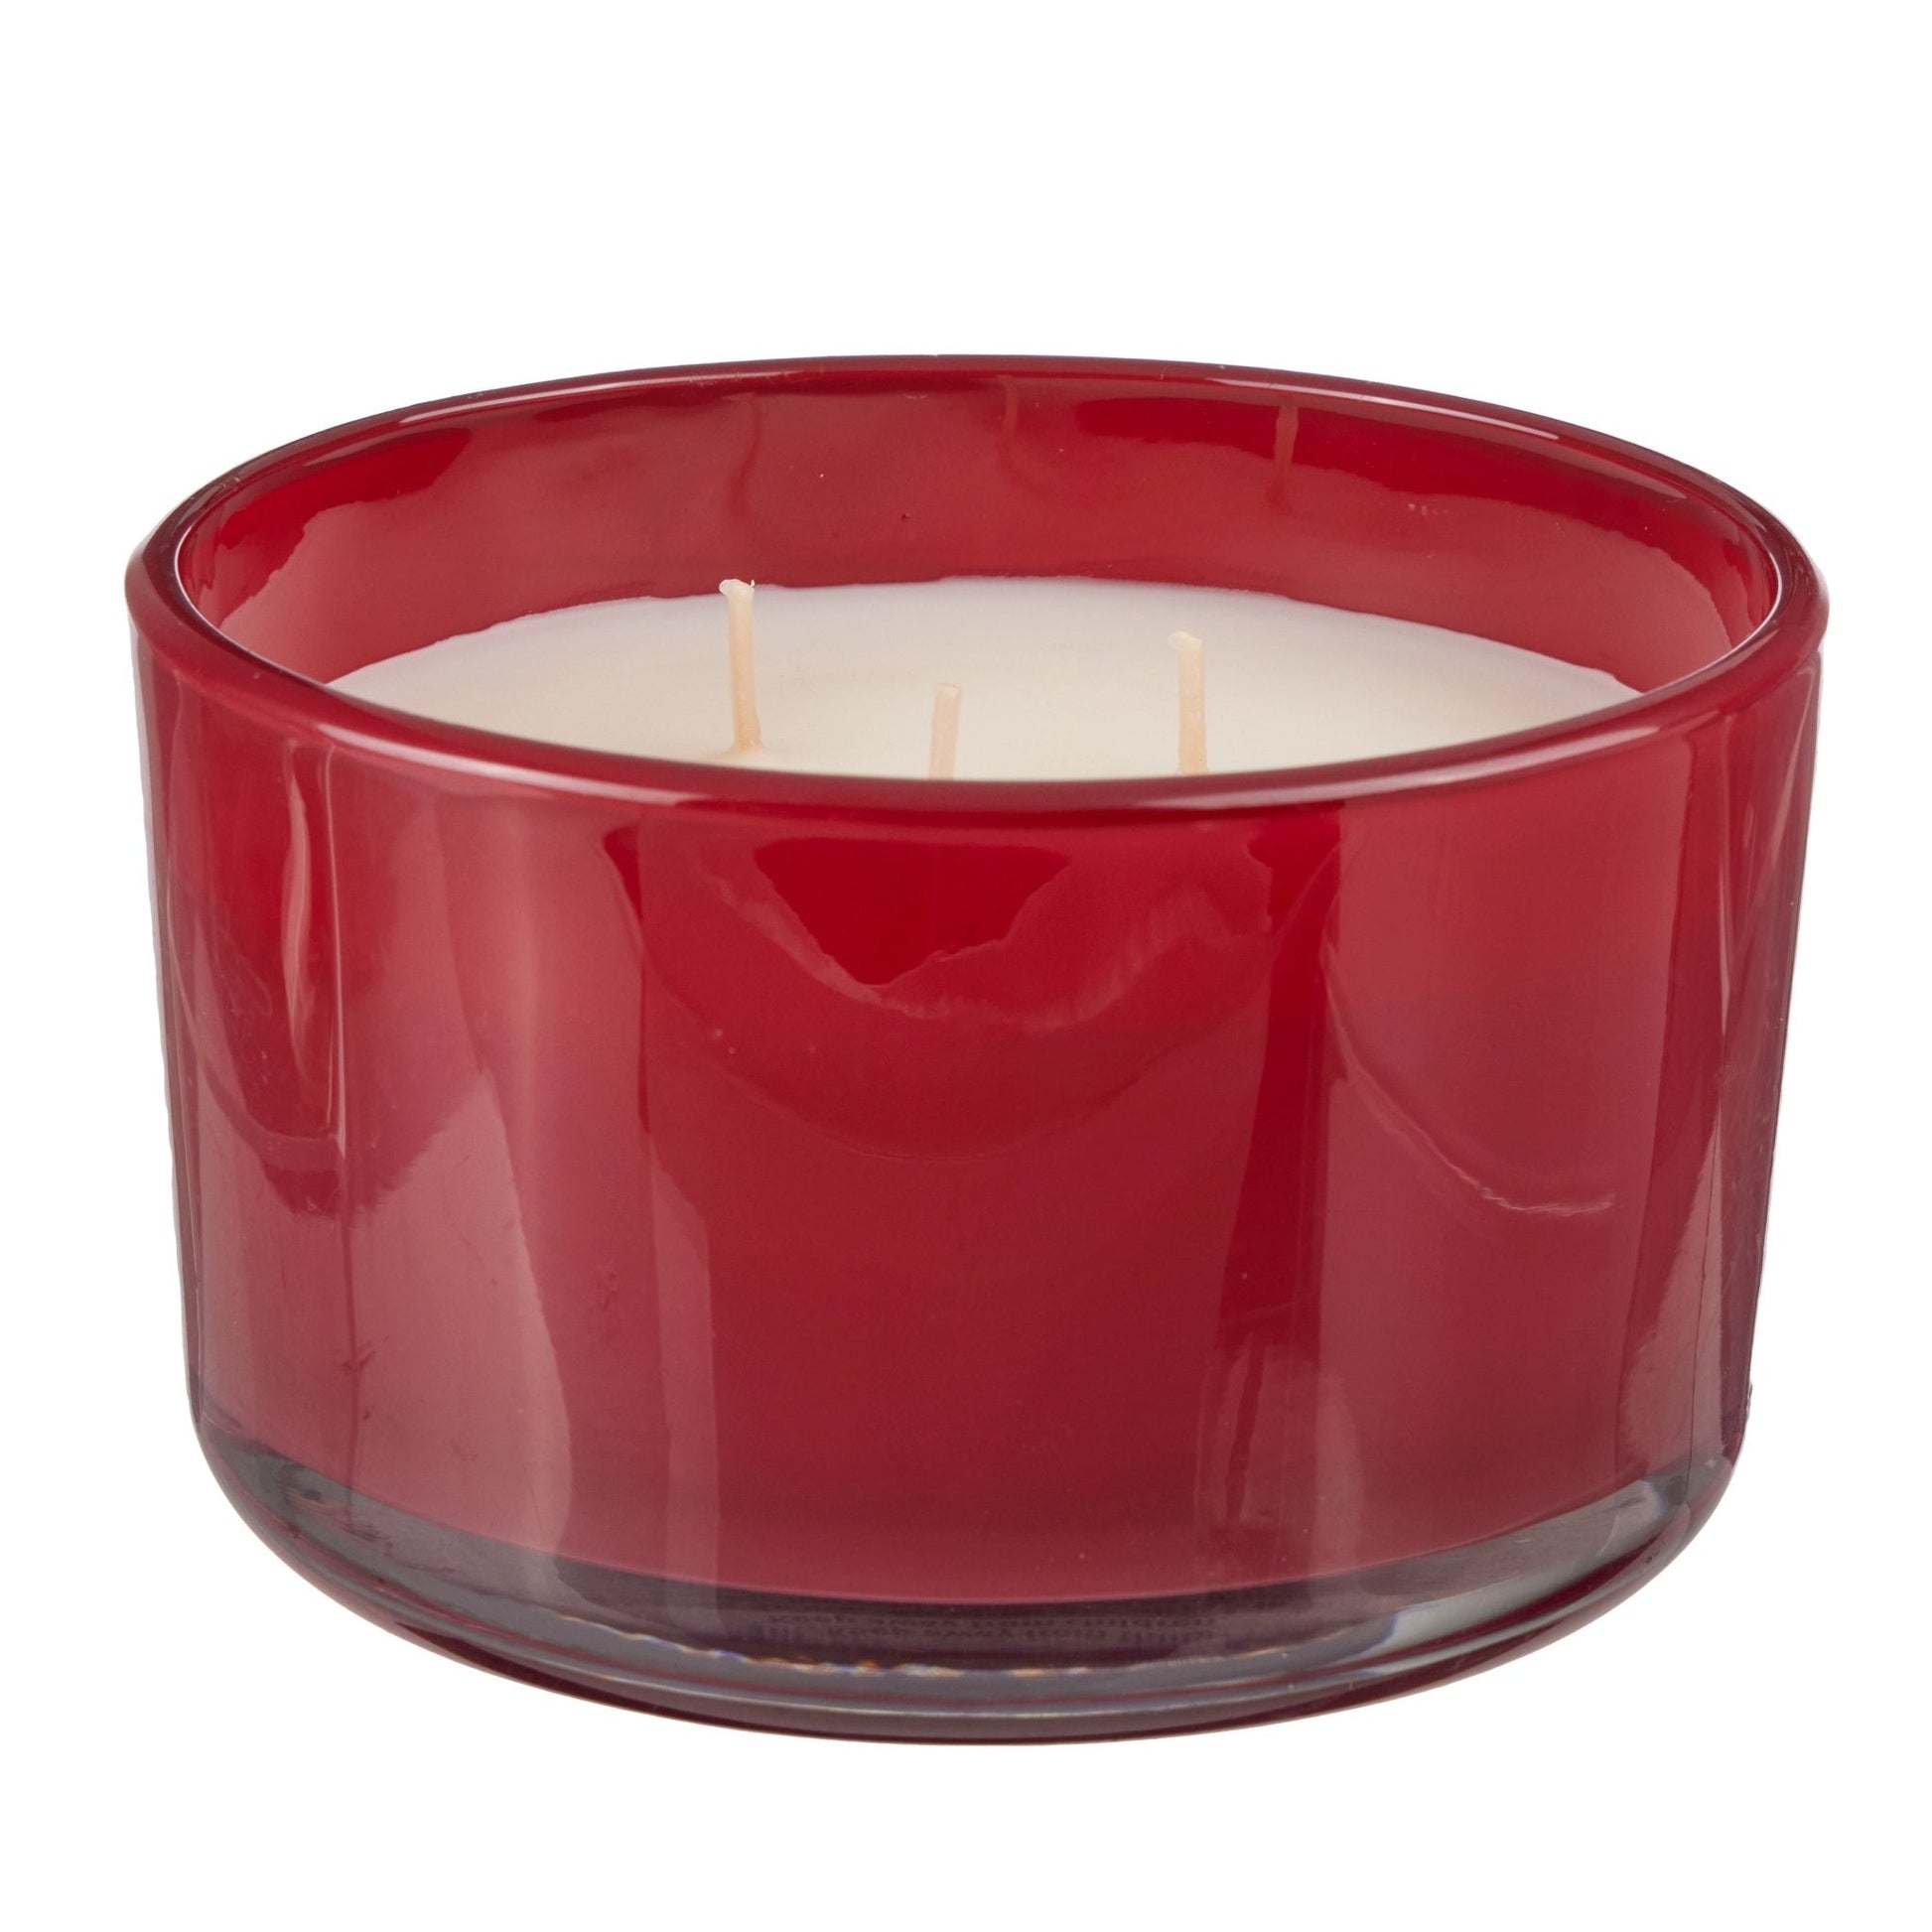 Pier 1 Spiced Cinnamon Filled 3-Wick Candle - Pier 1